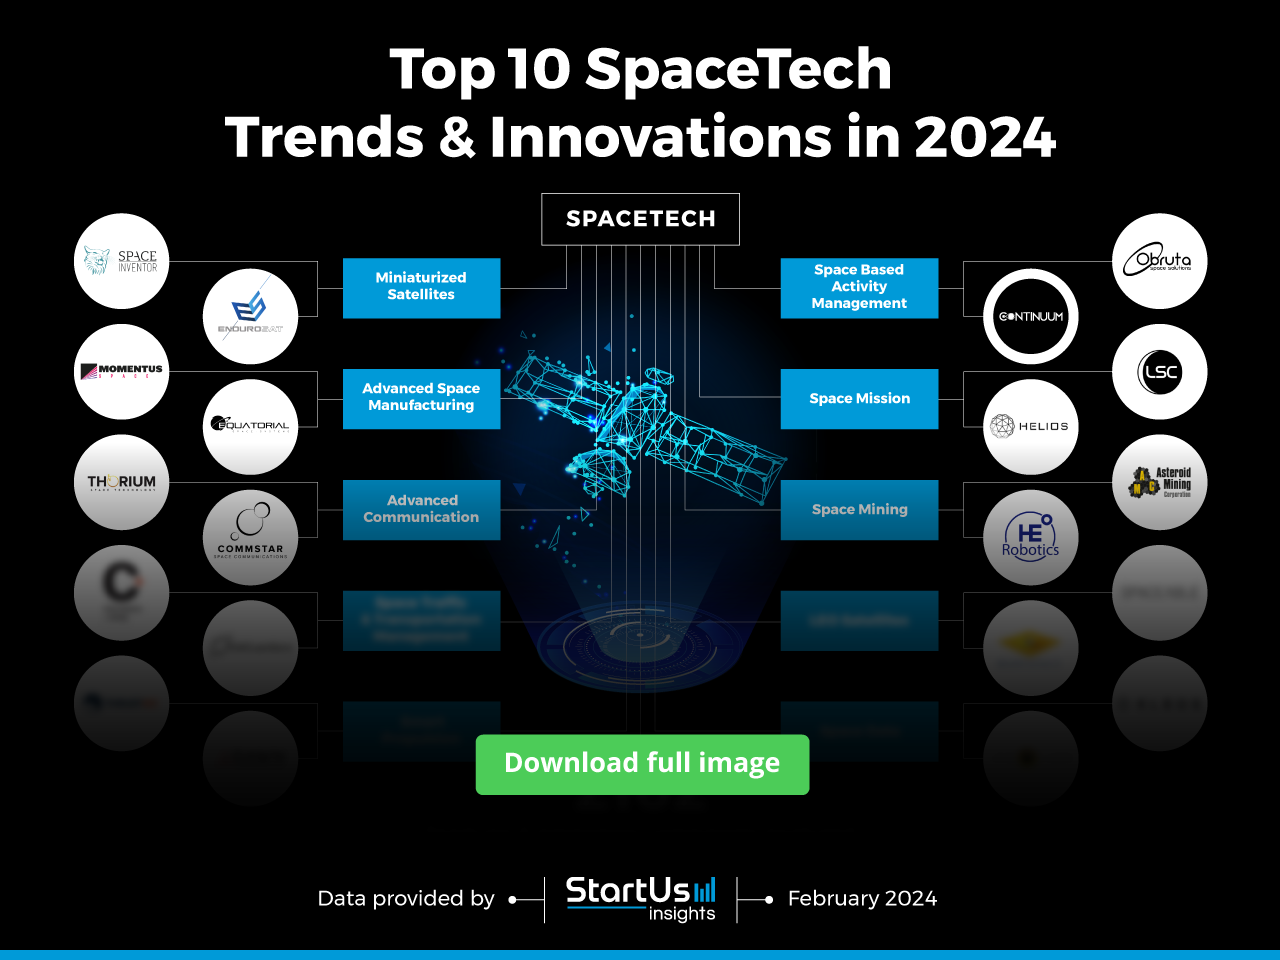 SpaceTech-Trends-InnovationMap-Blurred-StartUs-Insights-noresize